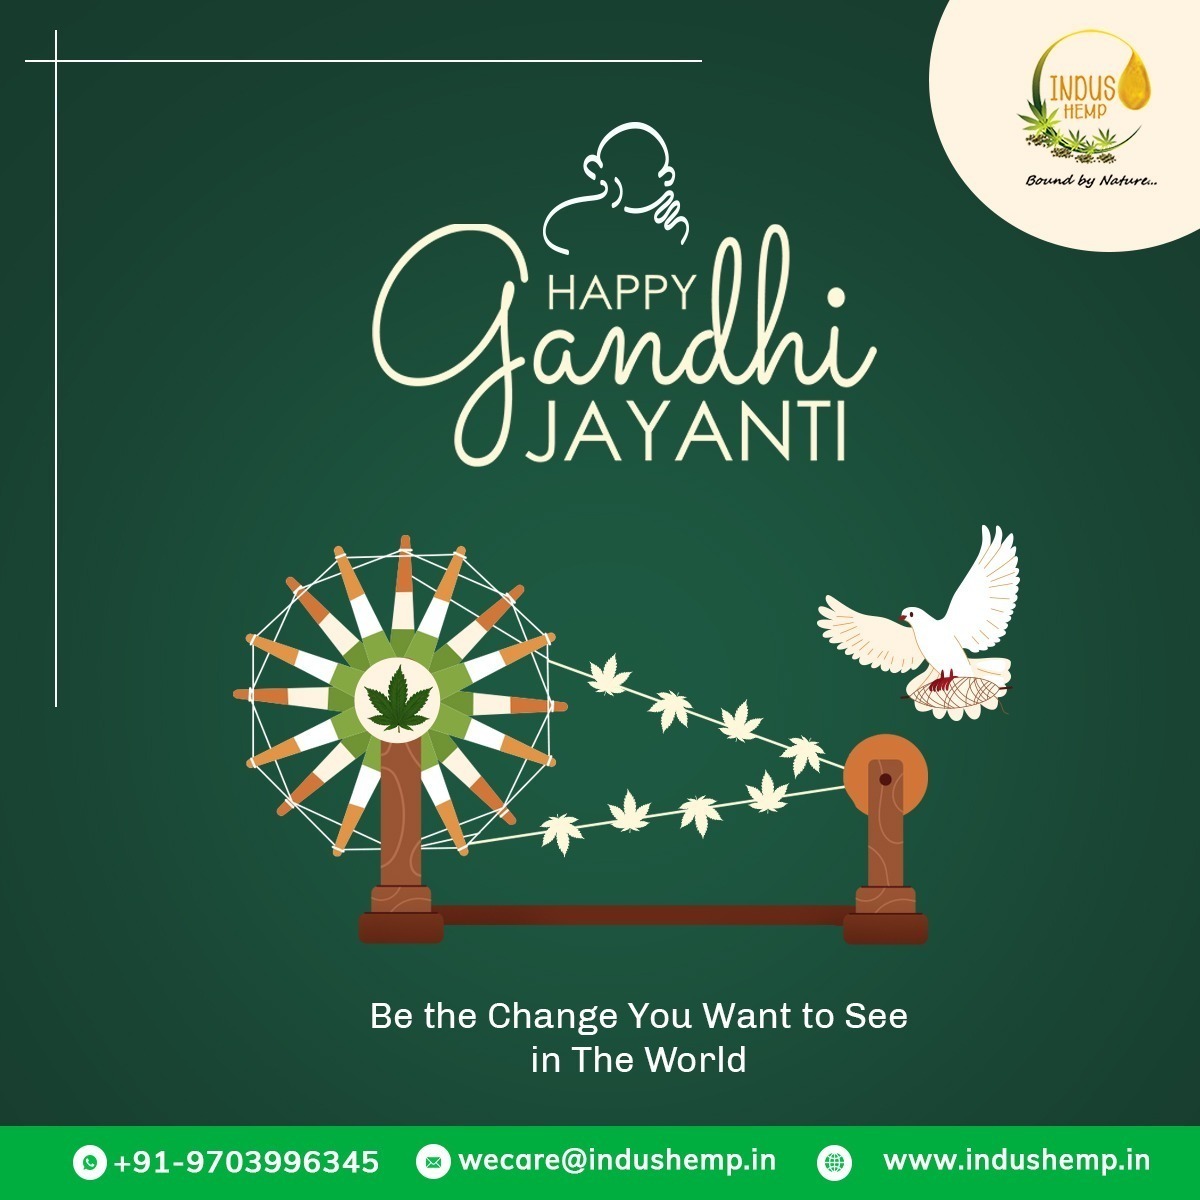 Let's take a moment to remember the great sacrifices & bravery of the man who sowed the seeds of #swadeshi and self-sufficiency in the minds of every #Indian. #GandhiJayanti #Gandhiji #MahatmaGandhi #GandhiJayanthi #hempseeds #hempseedoil #hempflour #hemprotein #hemp #IndusHemp